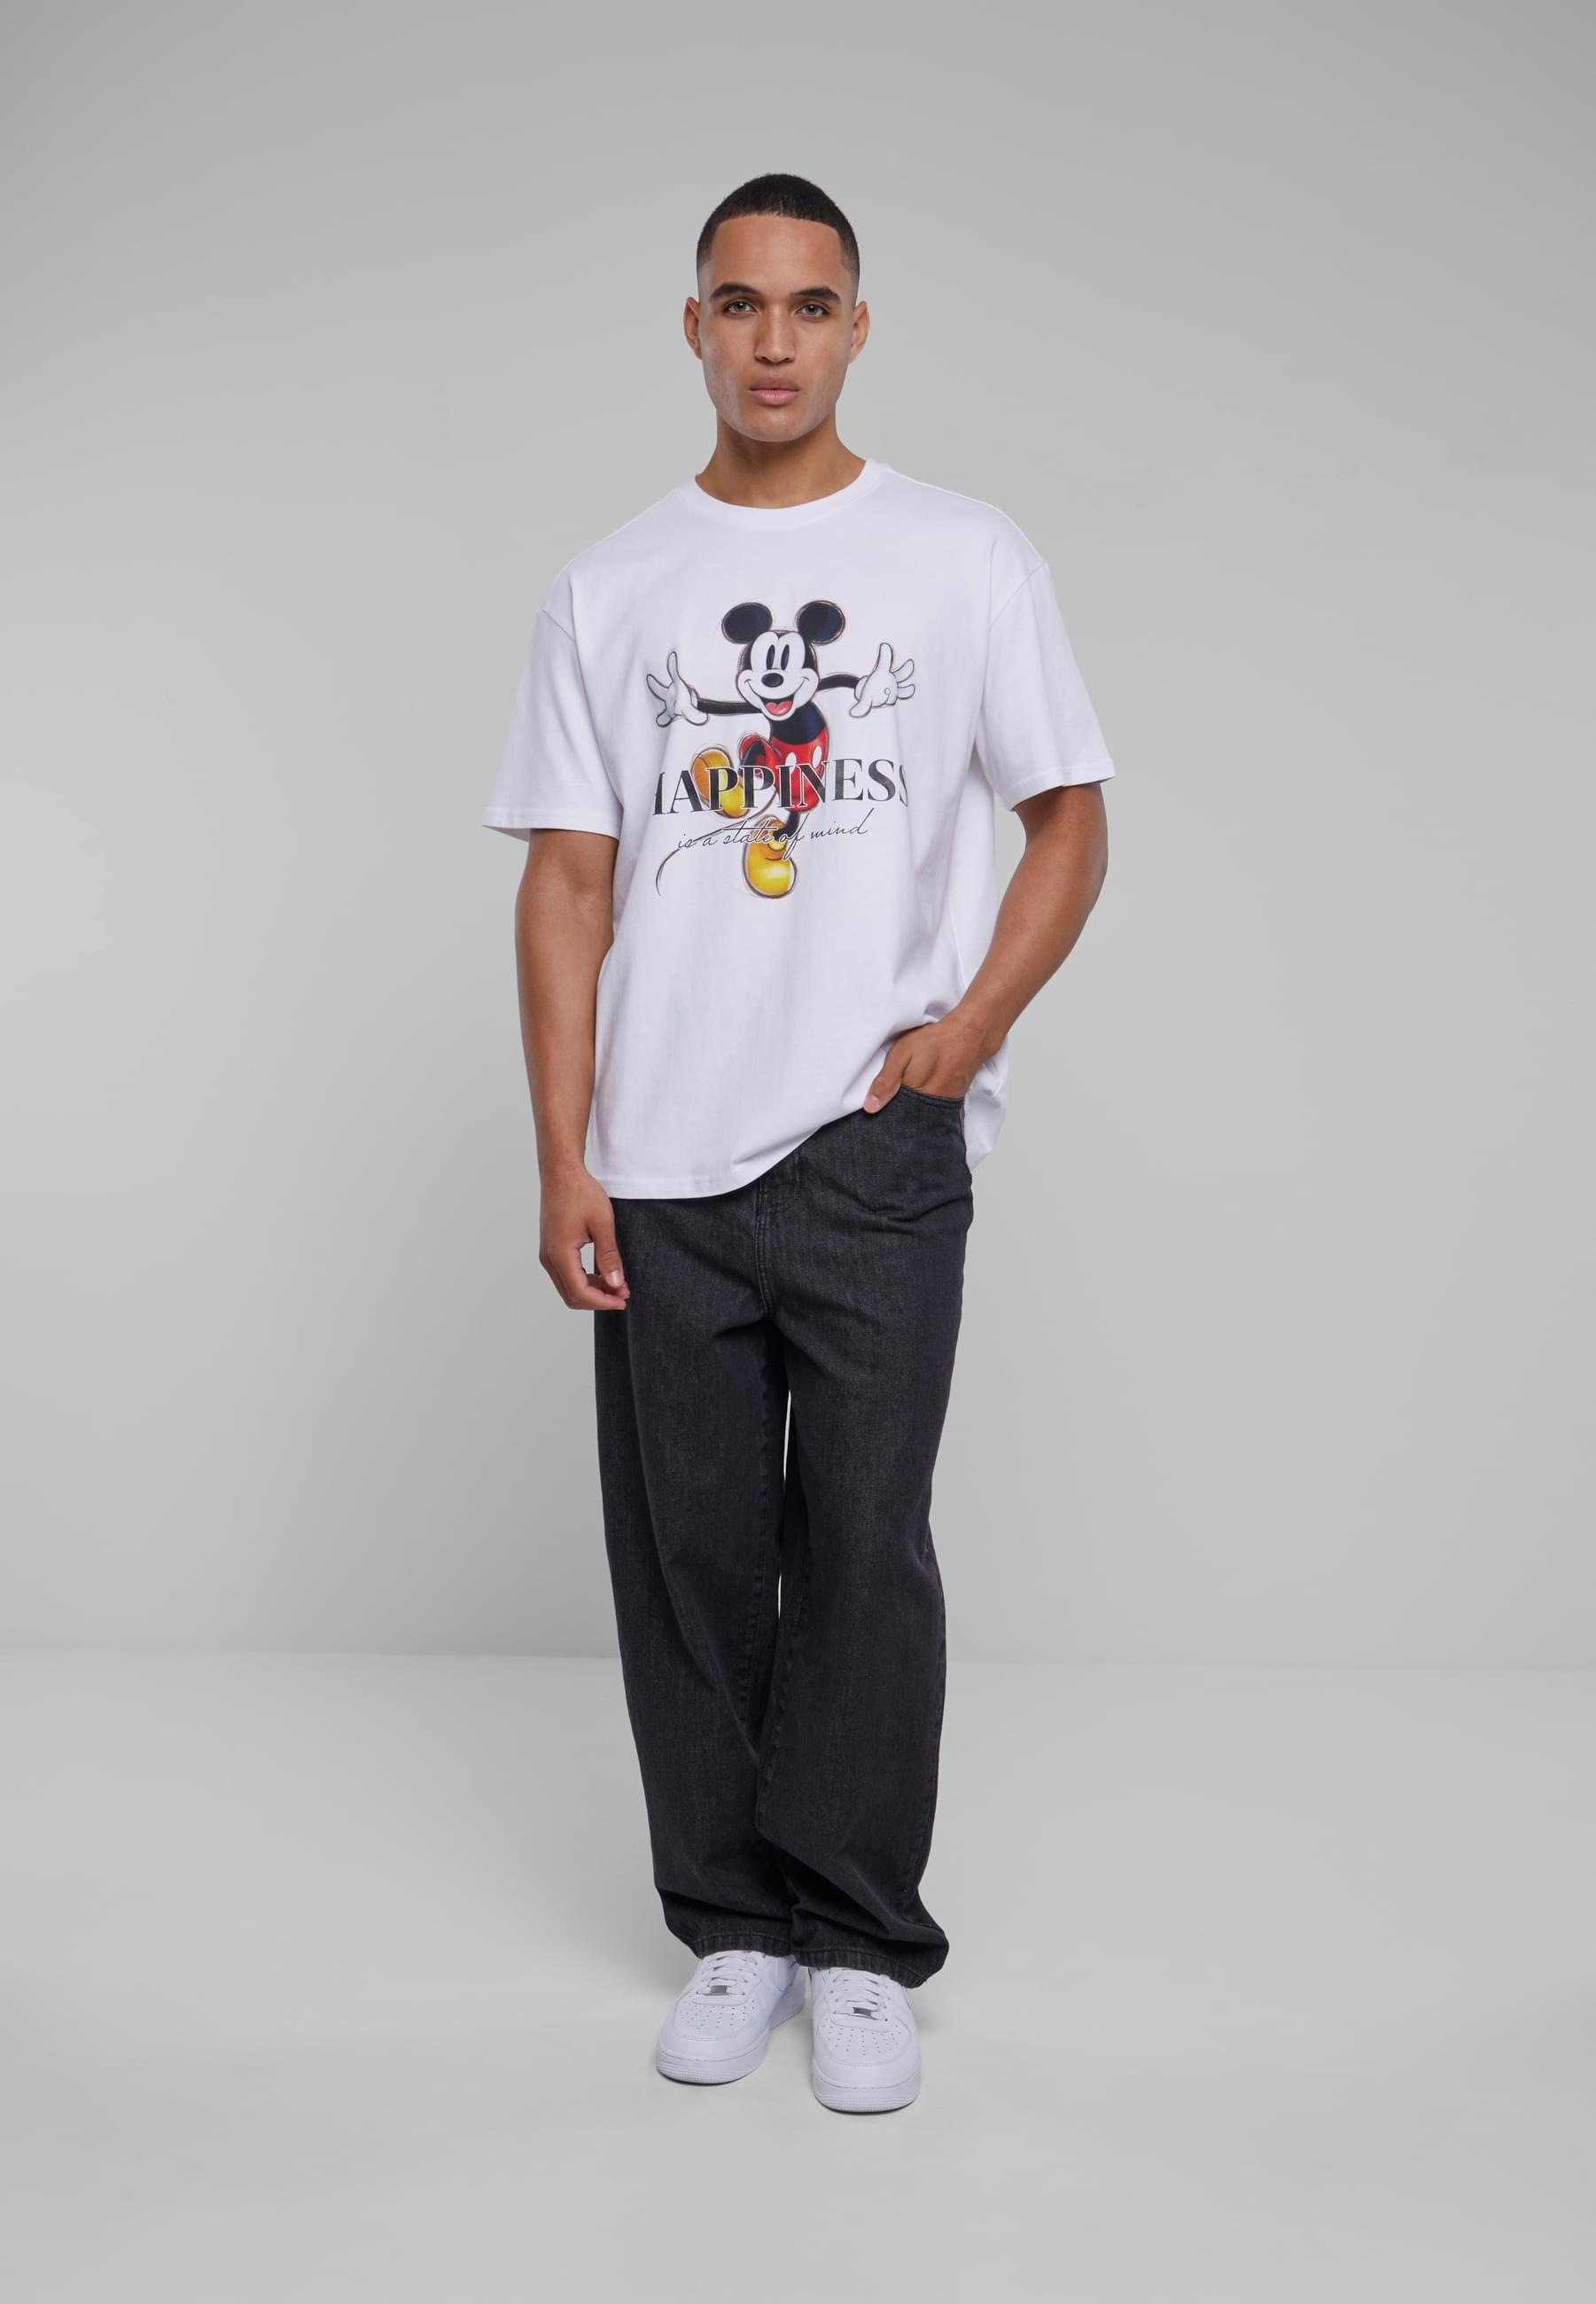 Happiness Oversize T-Shirt Mickey by Tee kaufen tlg.) | BAUR 100 Mister Upscale Disney (1 online »Unisex Tee«,